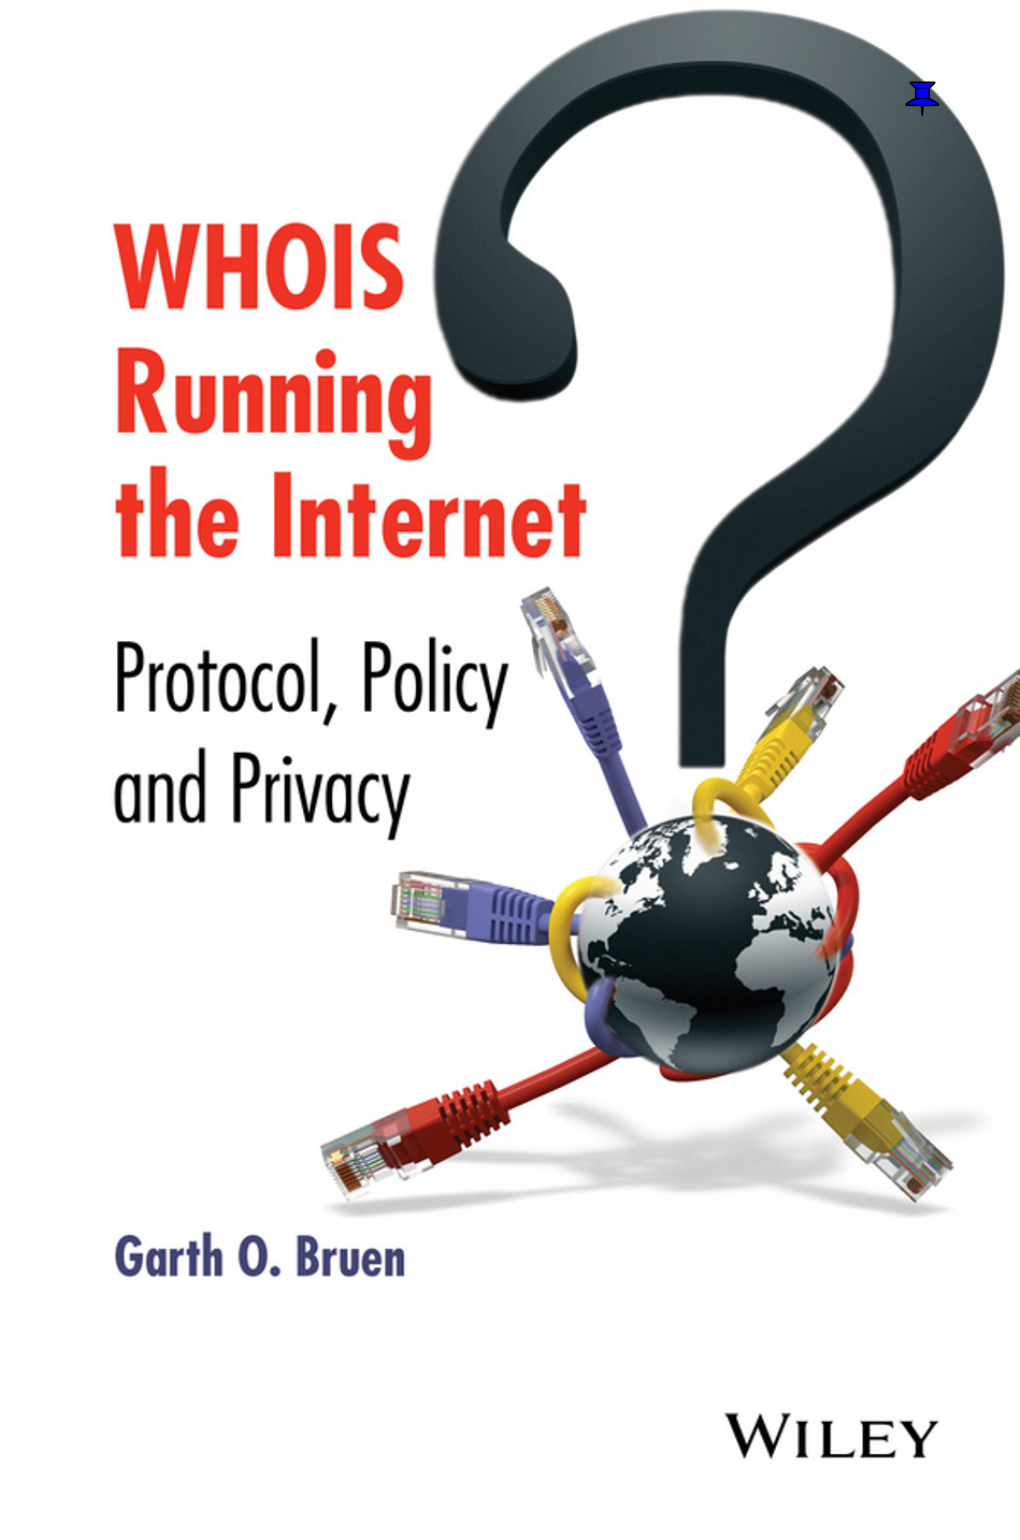 WHOIS Running the Internet: Protocol, Policy, and Privacy, First Edition